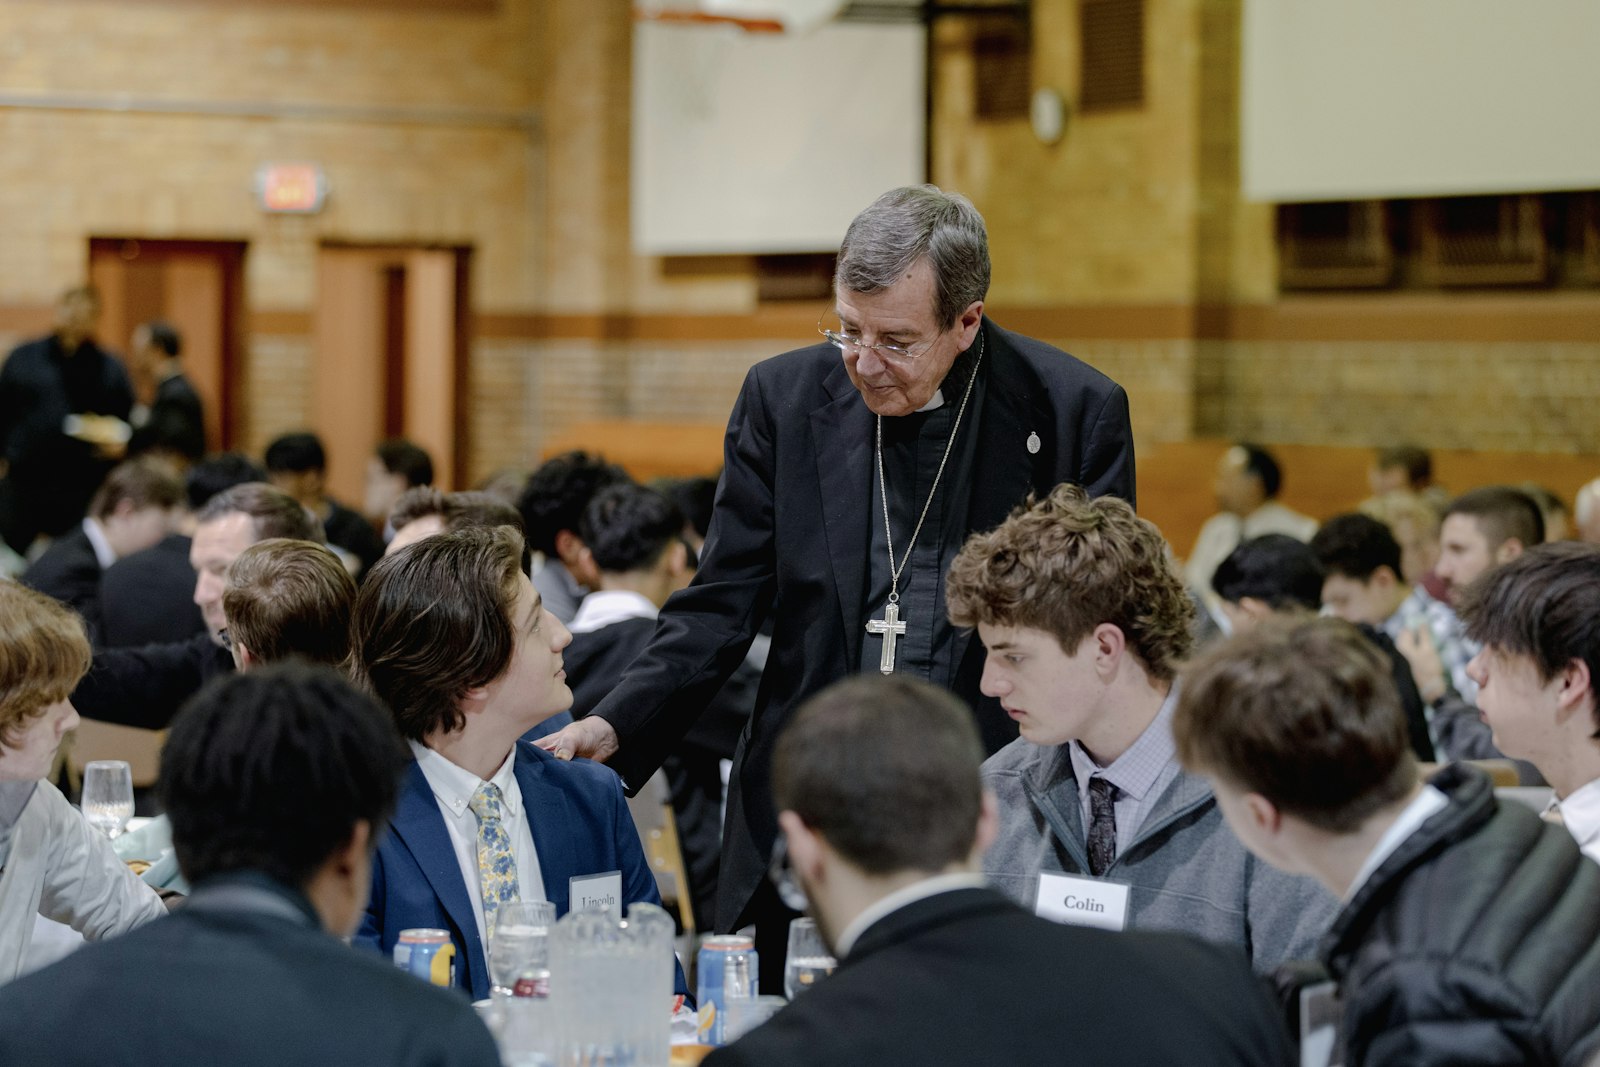 Archbishop Vigneron greets a table of young men gathered at Sacred Heart Major Seminary. The archbishop encouraged those gathered to pray for one another in discerning God's will for their lives.